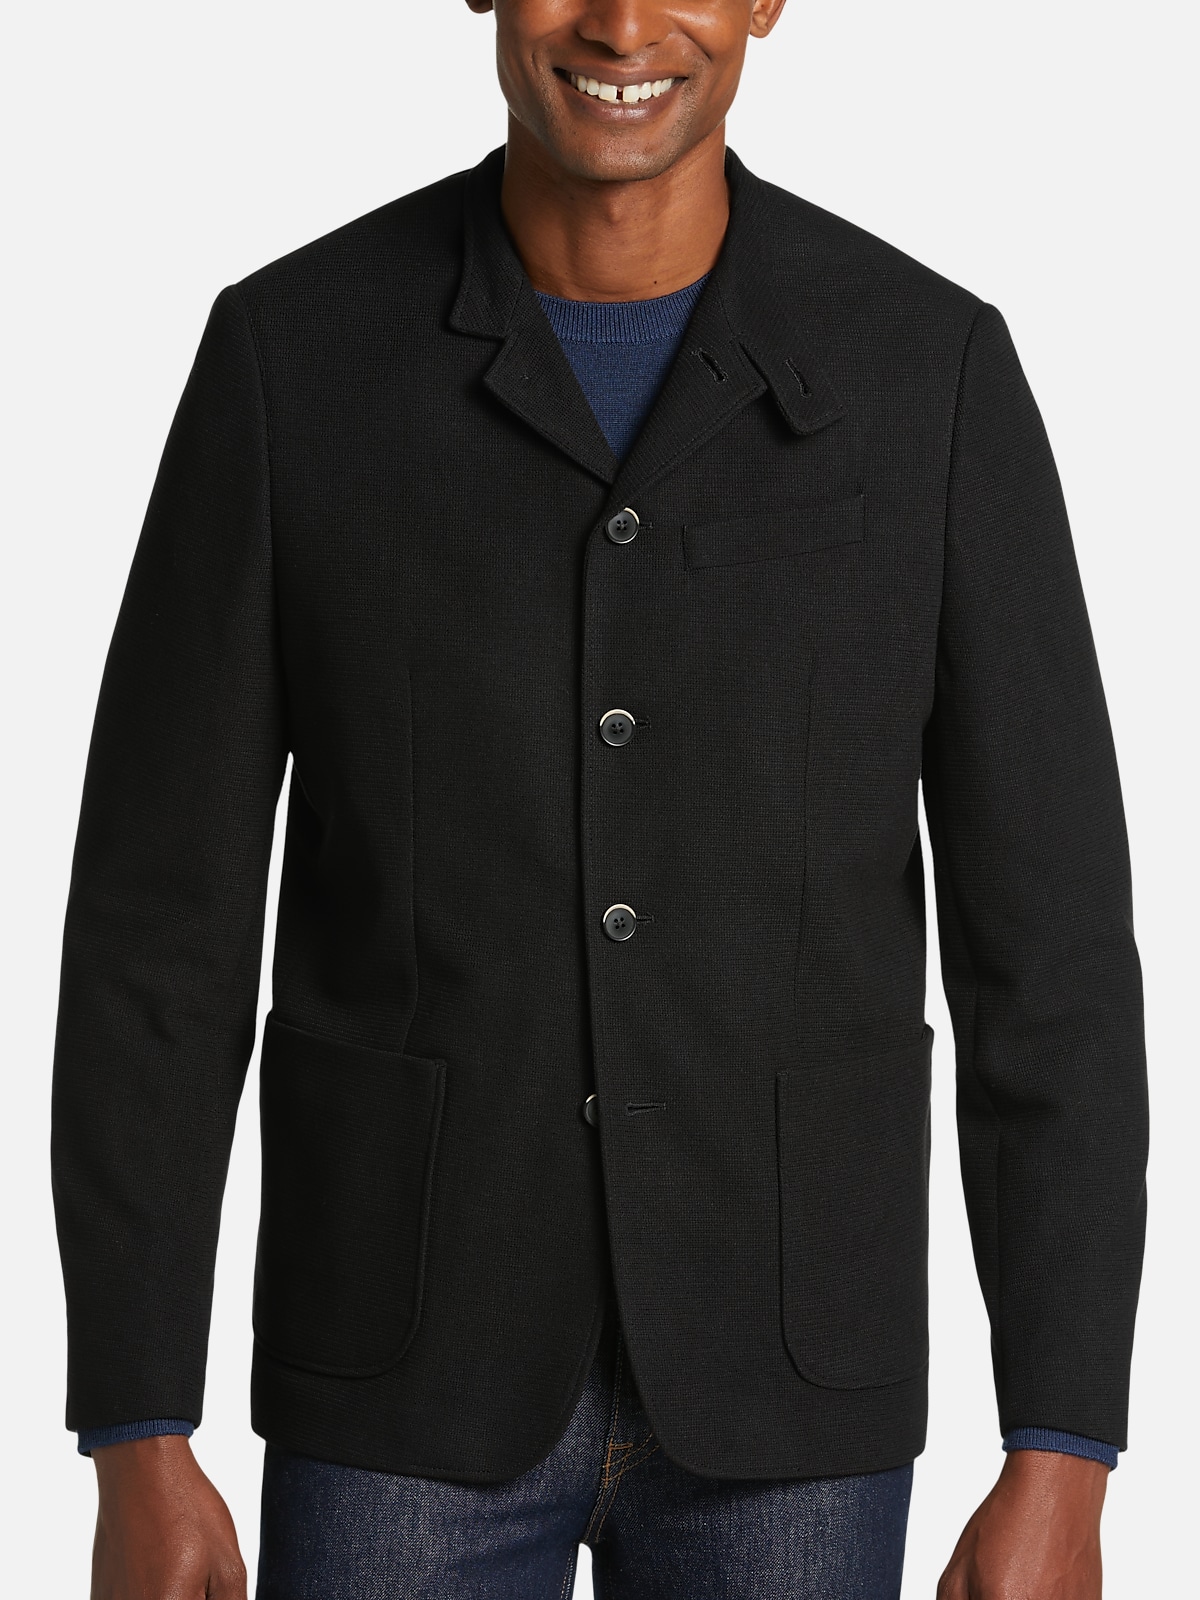 Awearness Kenneth Cole Slim Fit Nehru Jacket | All Clearance $39.99 ...